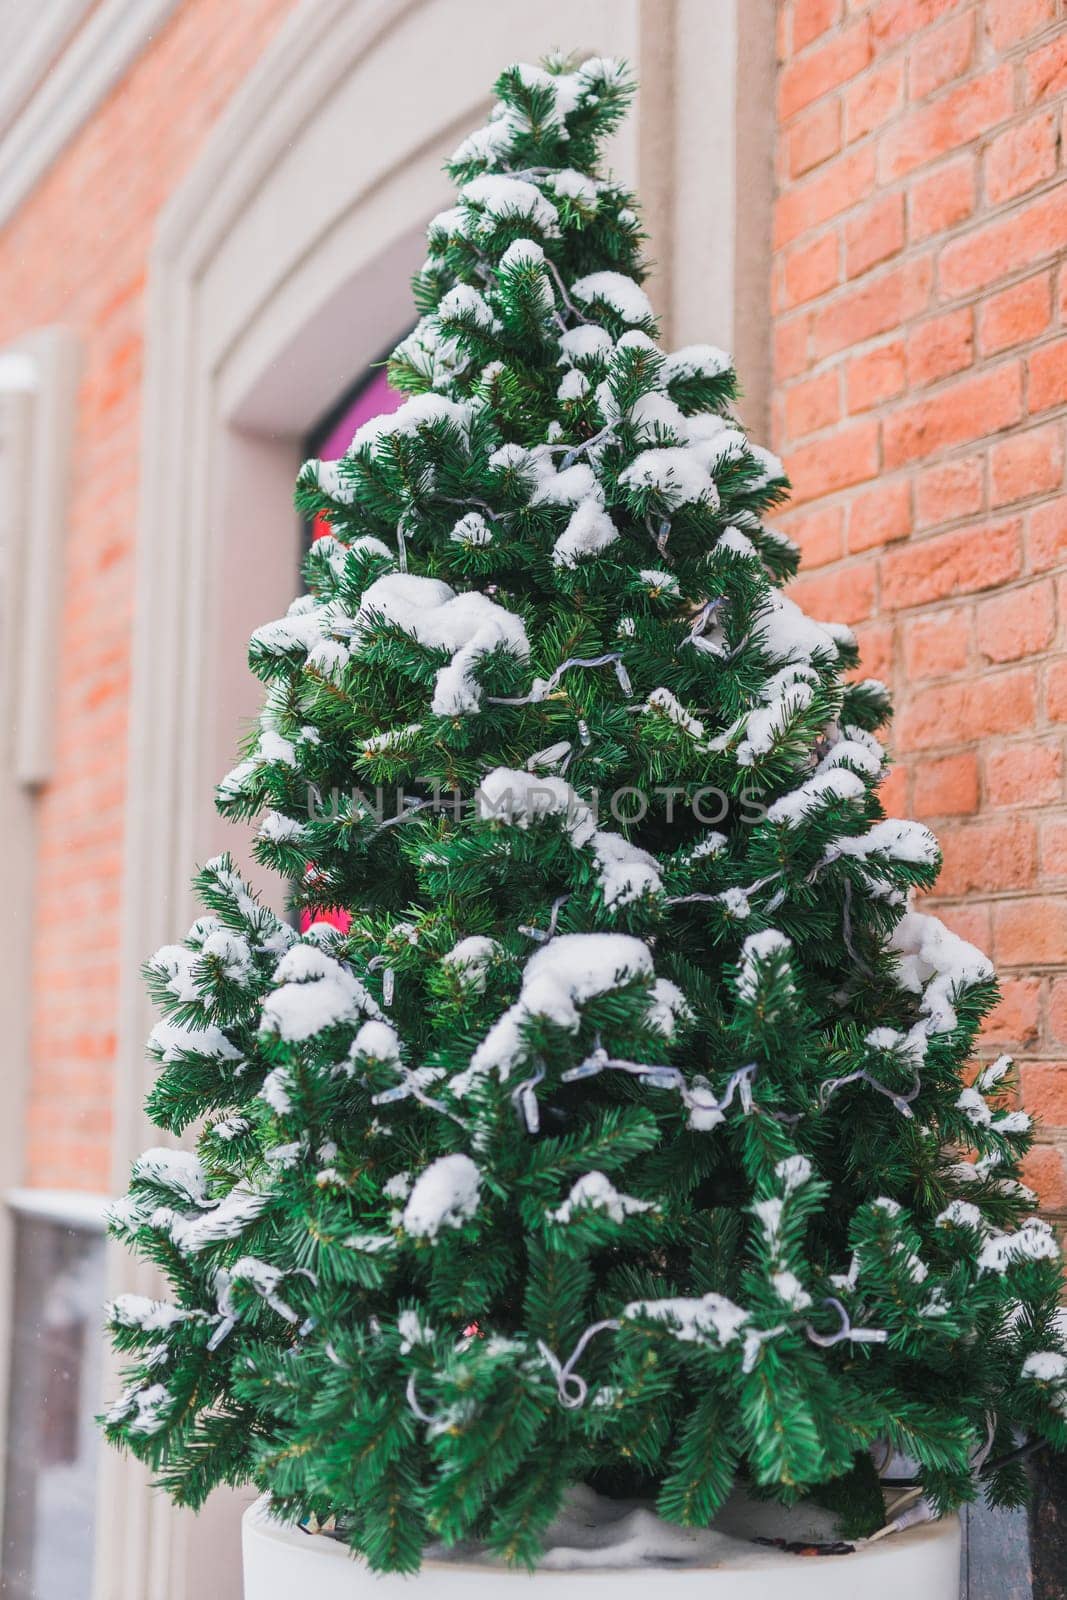 Decorated christmas tree outdoor in store window with snow. Winter holidays and decor for xmas by Satura86